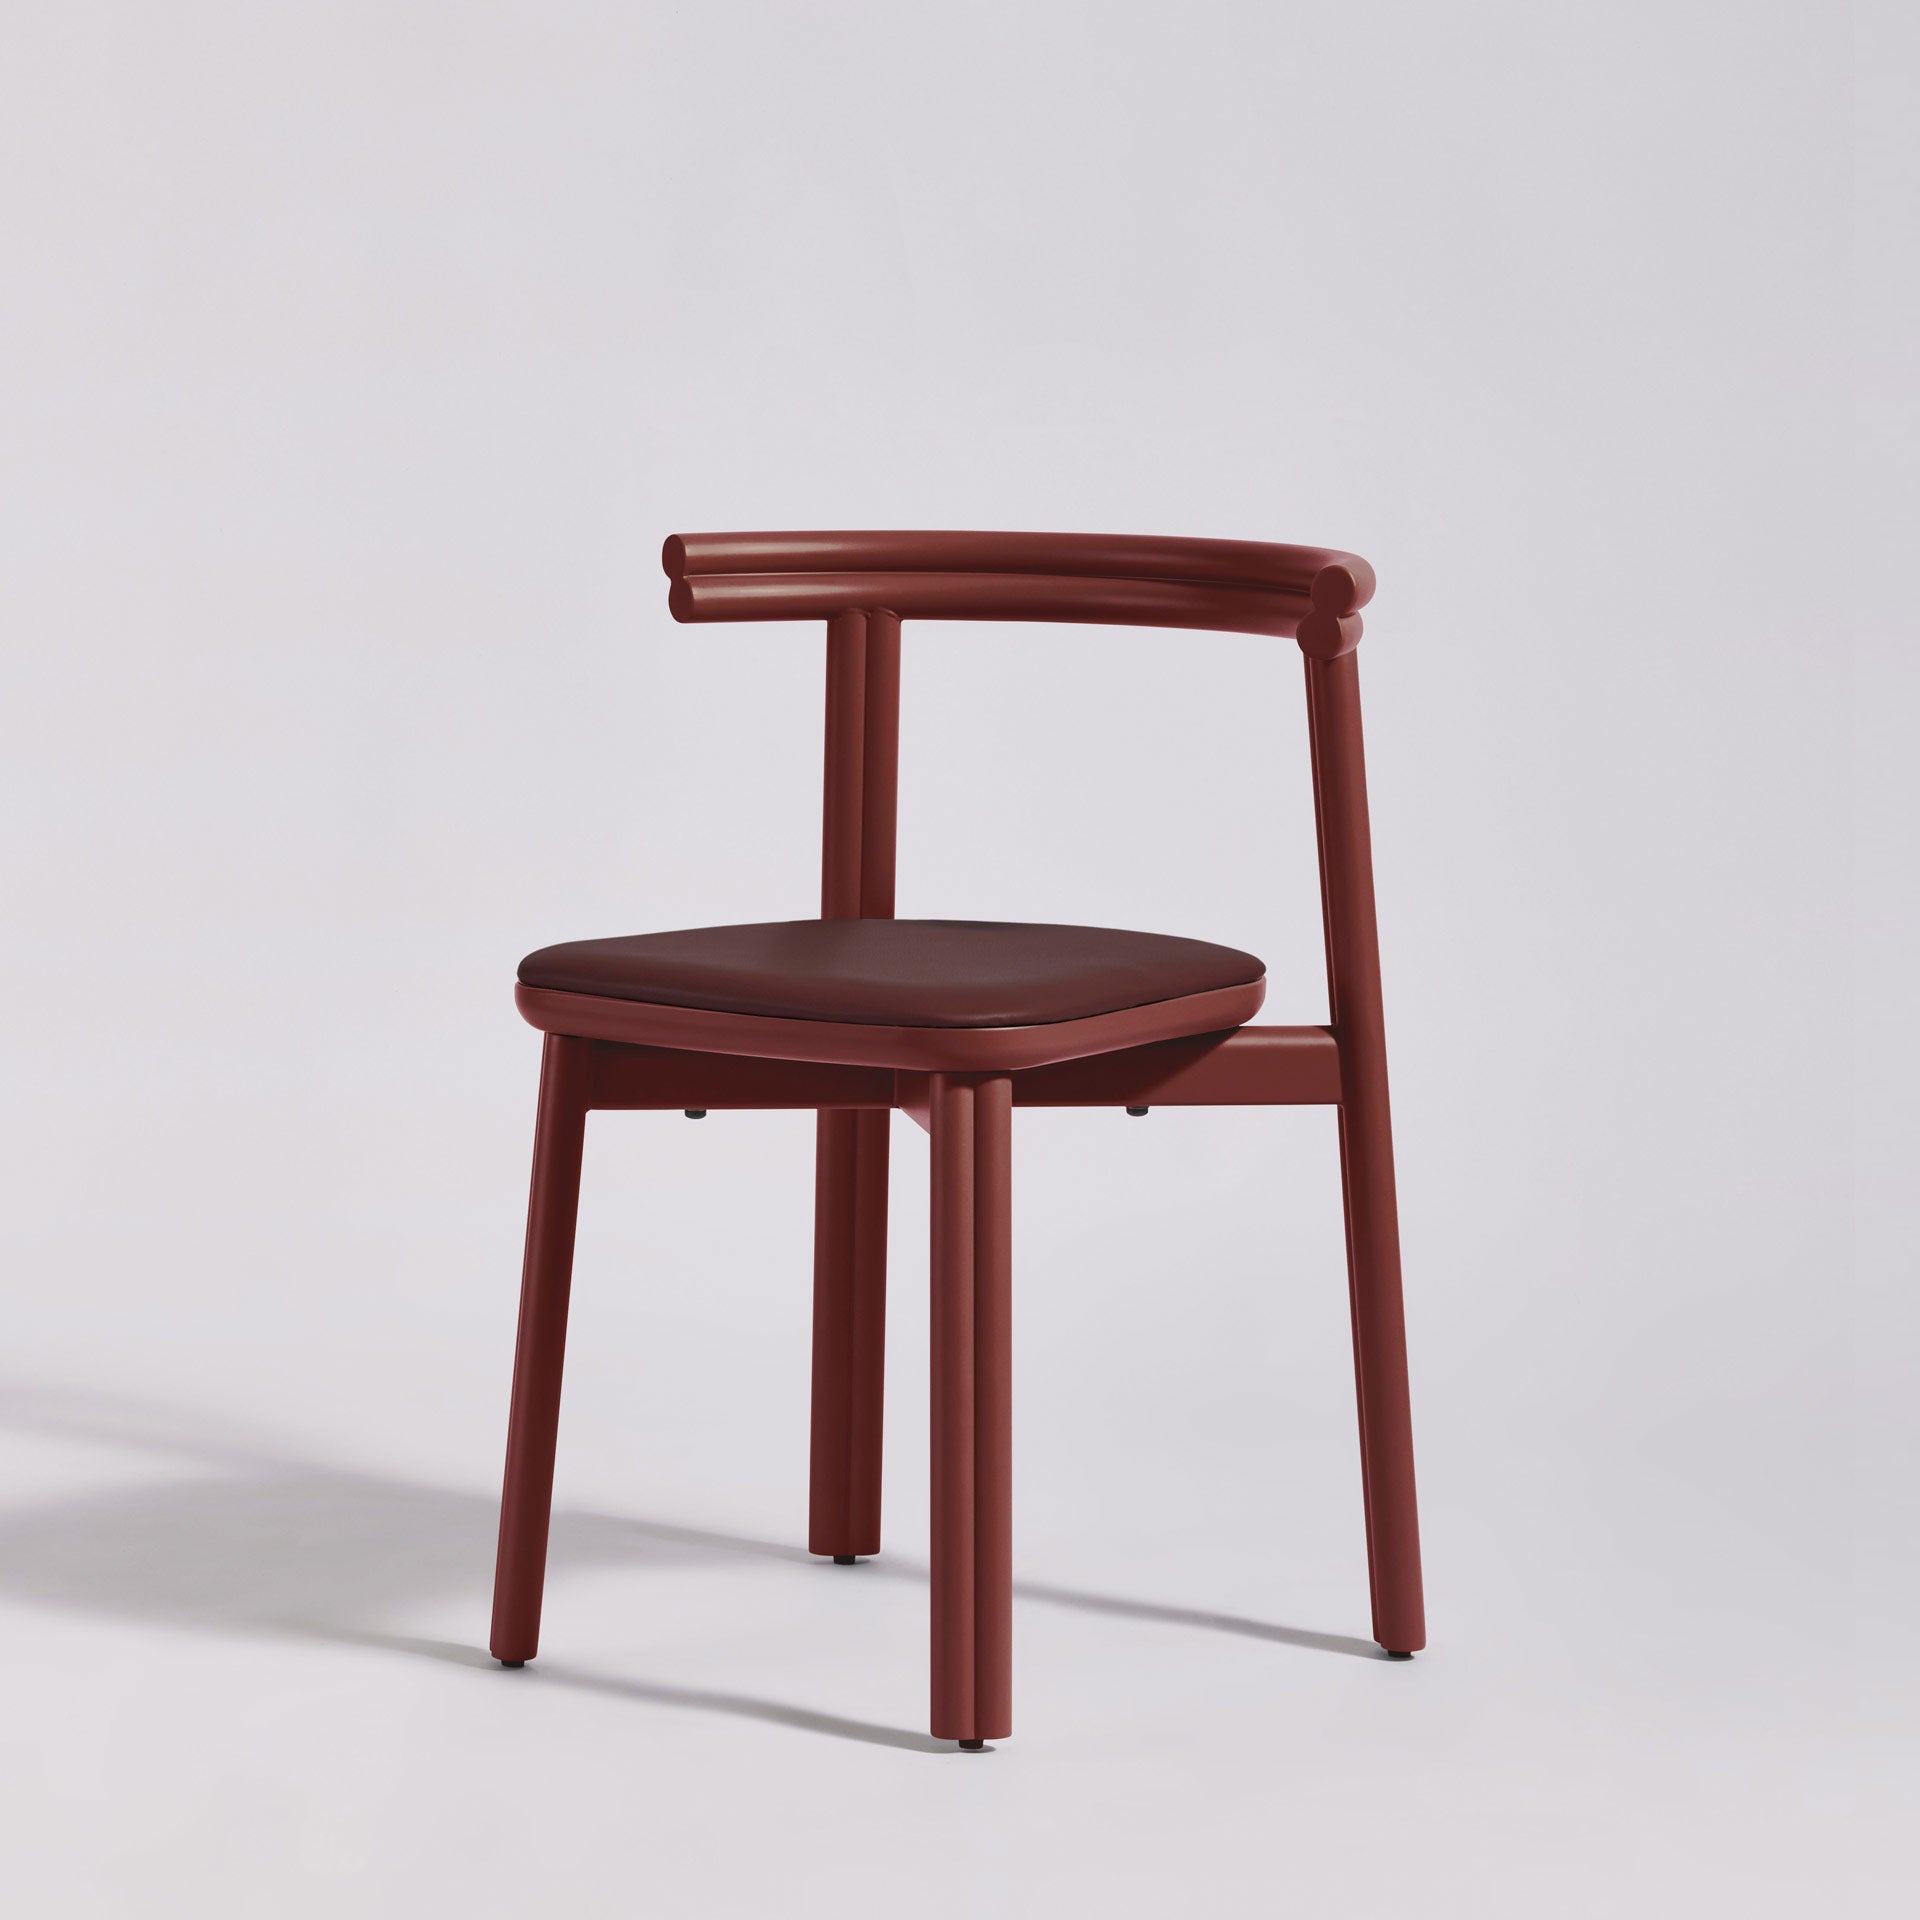 Rust Red Upholstered Twill Metal Chair | Metal Bar and Dining Chair | Gibson Karlo | DesignByThem